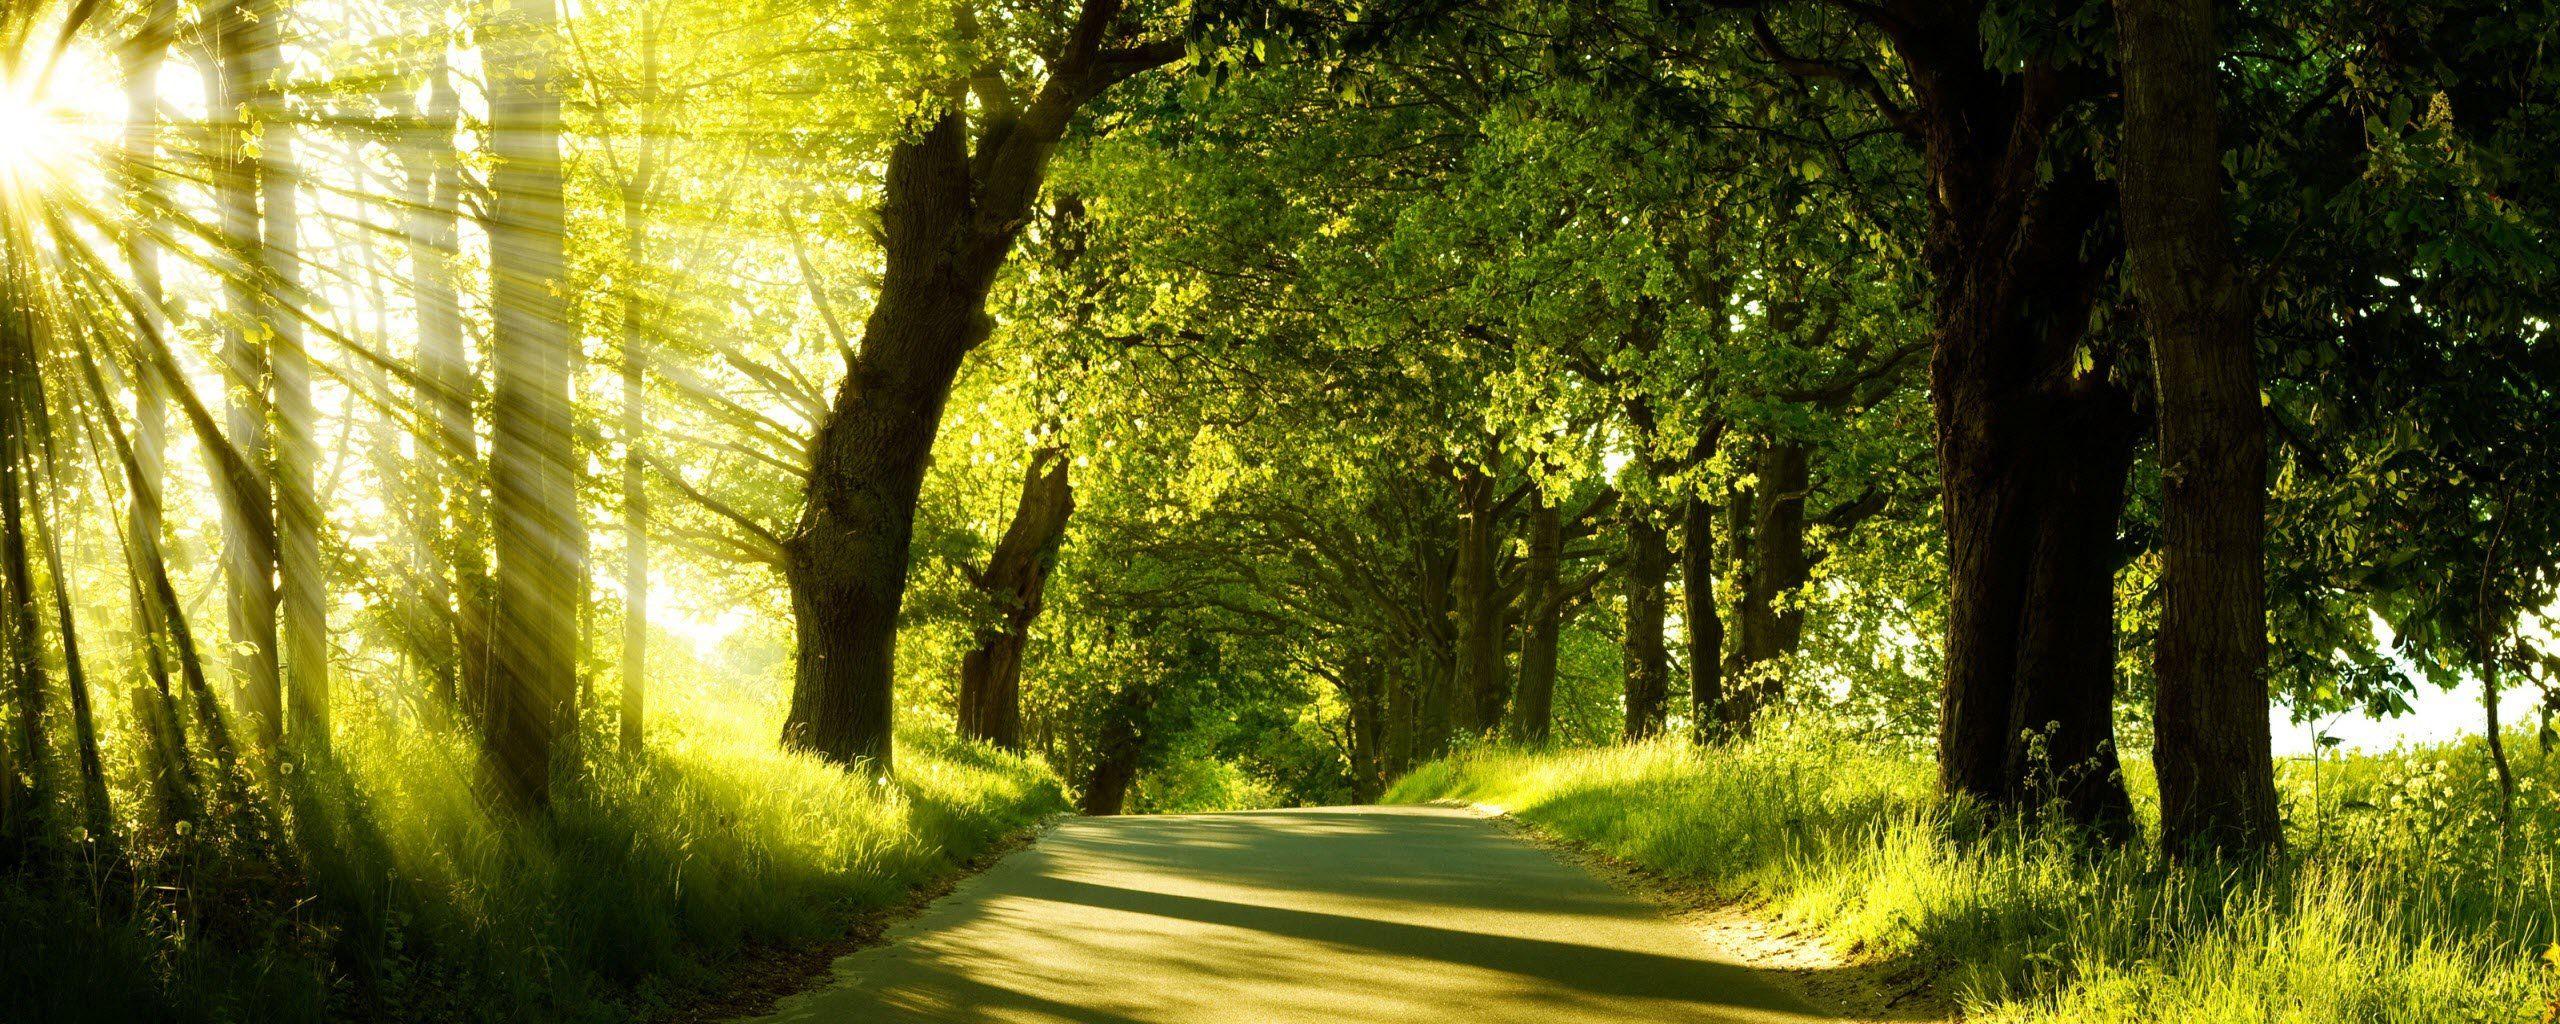 Nature trees forests paths woods sunlight wallpaperx1024